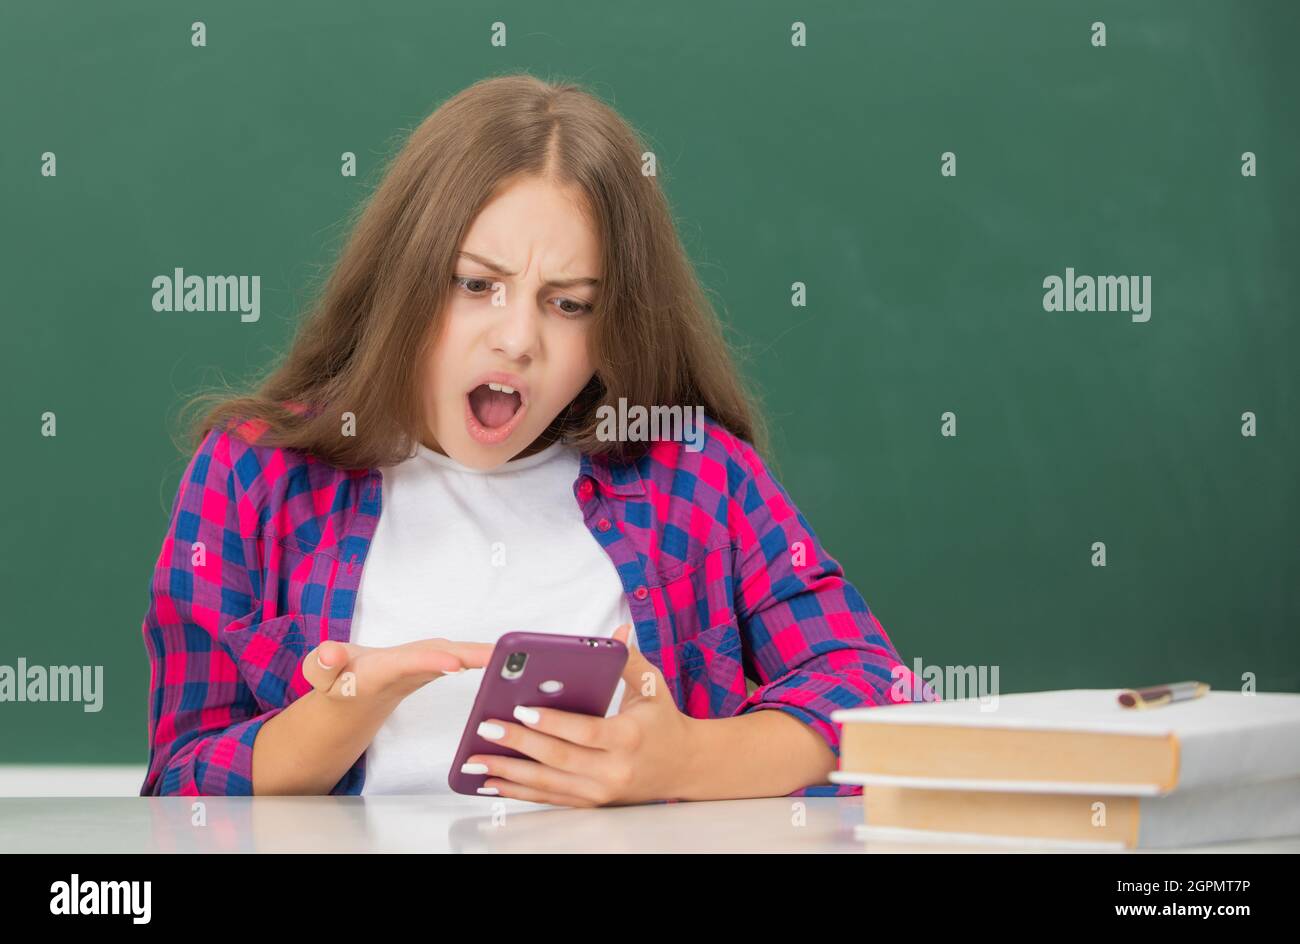 shocked child typing and texting. sms and instant messaging. Stock Photo